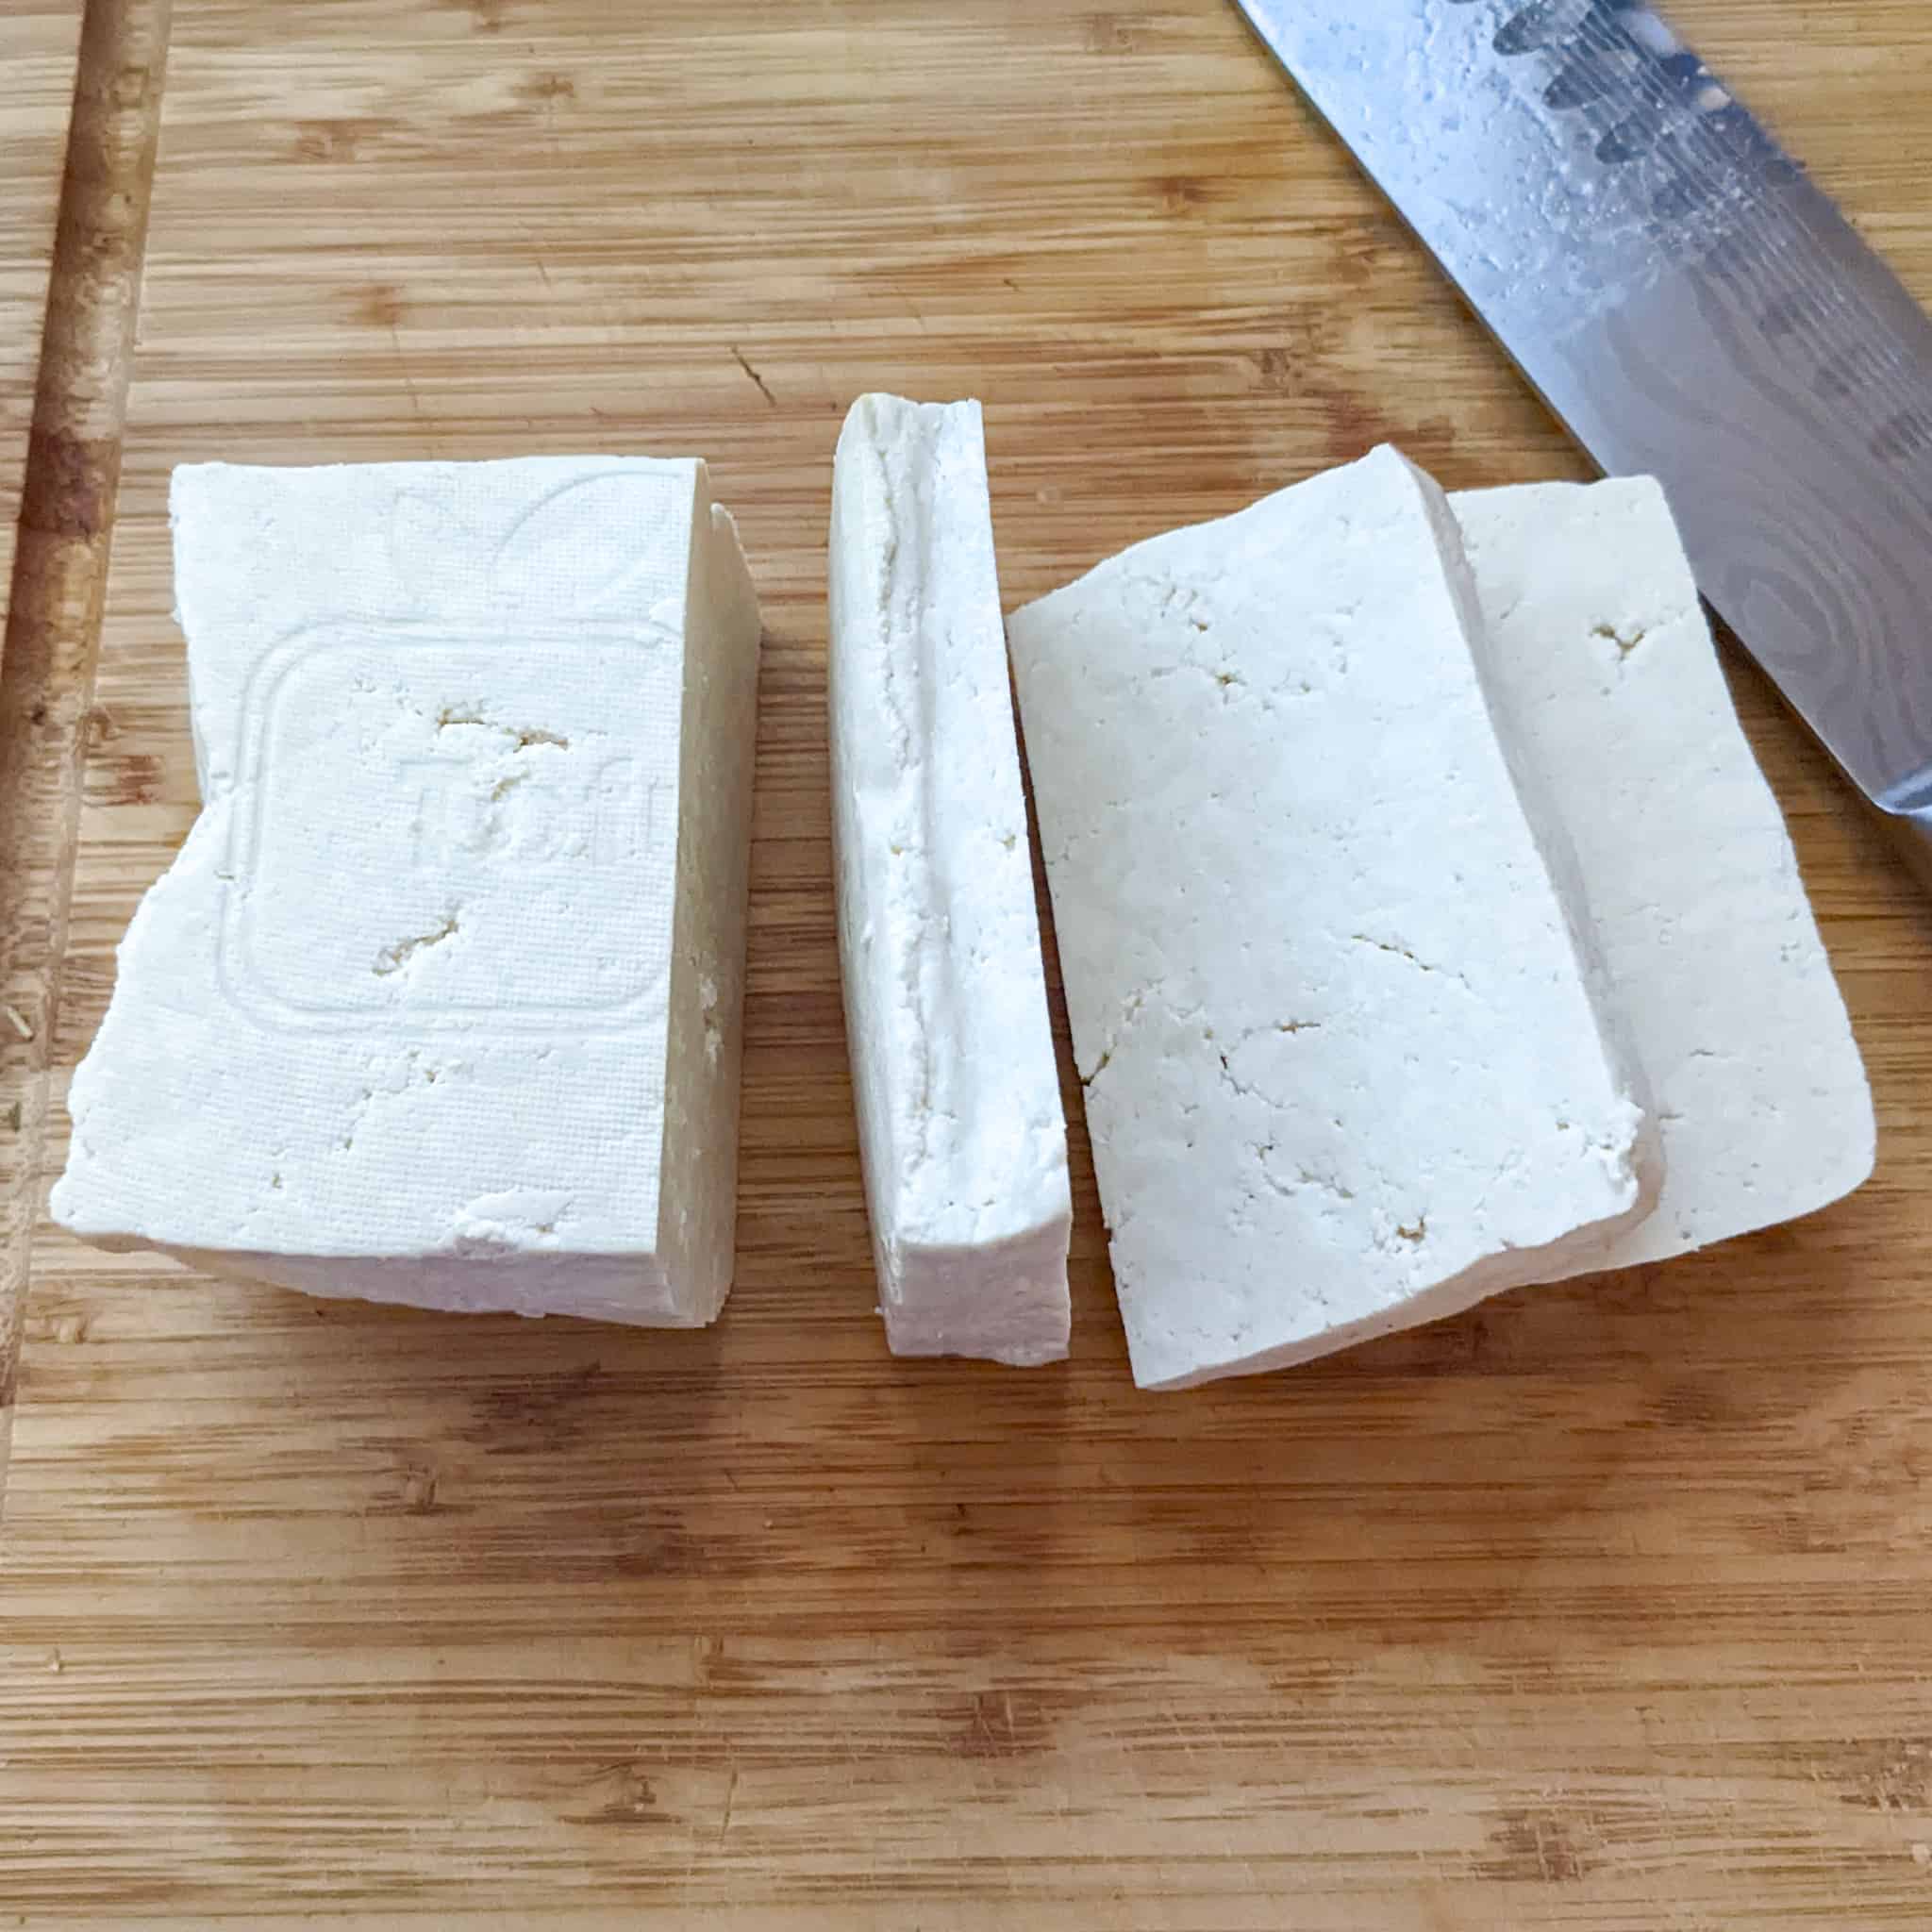 pressed tofu on a wooden cutting board cut into halves with one piece cut into three slices displayed next to a santoku knife